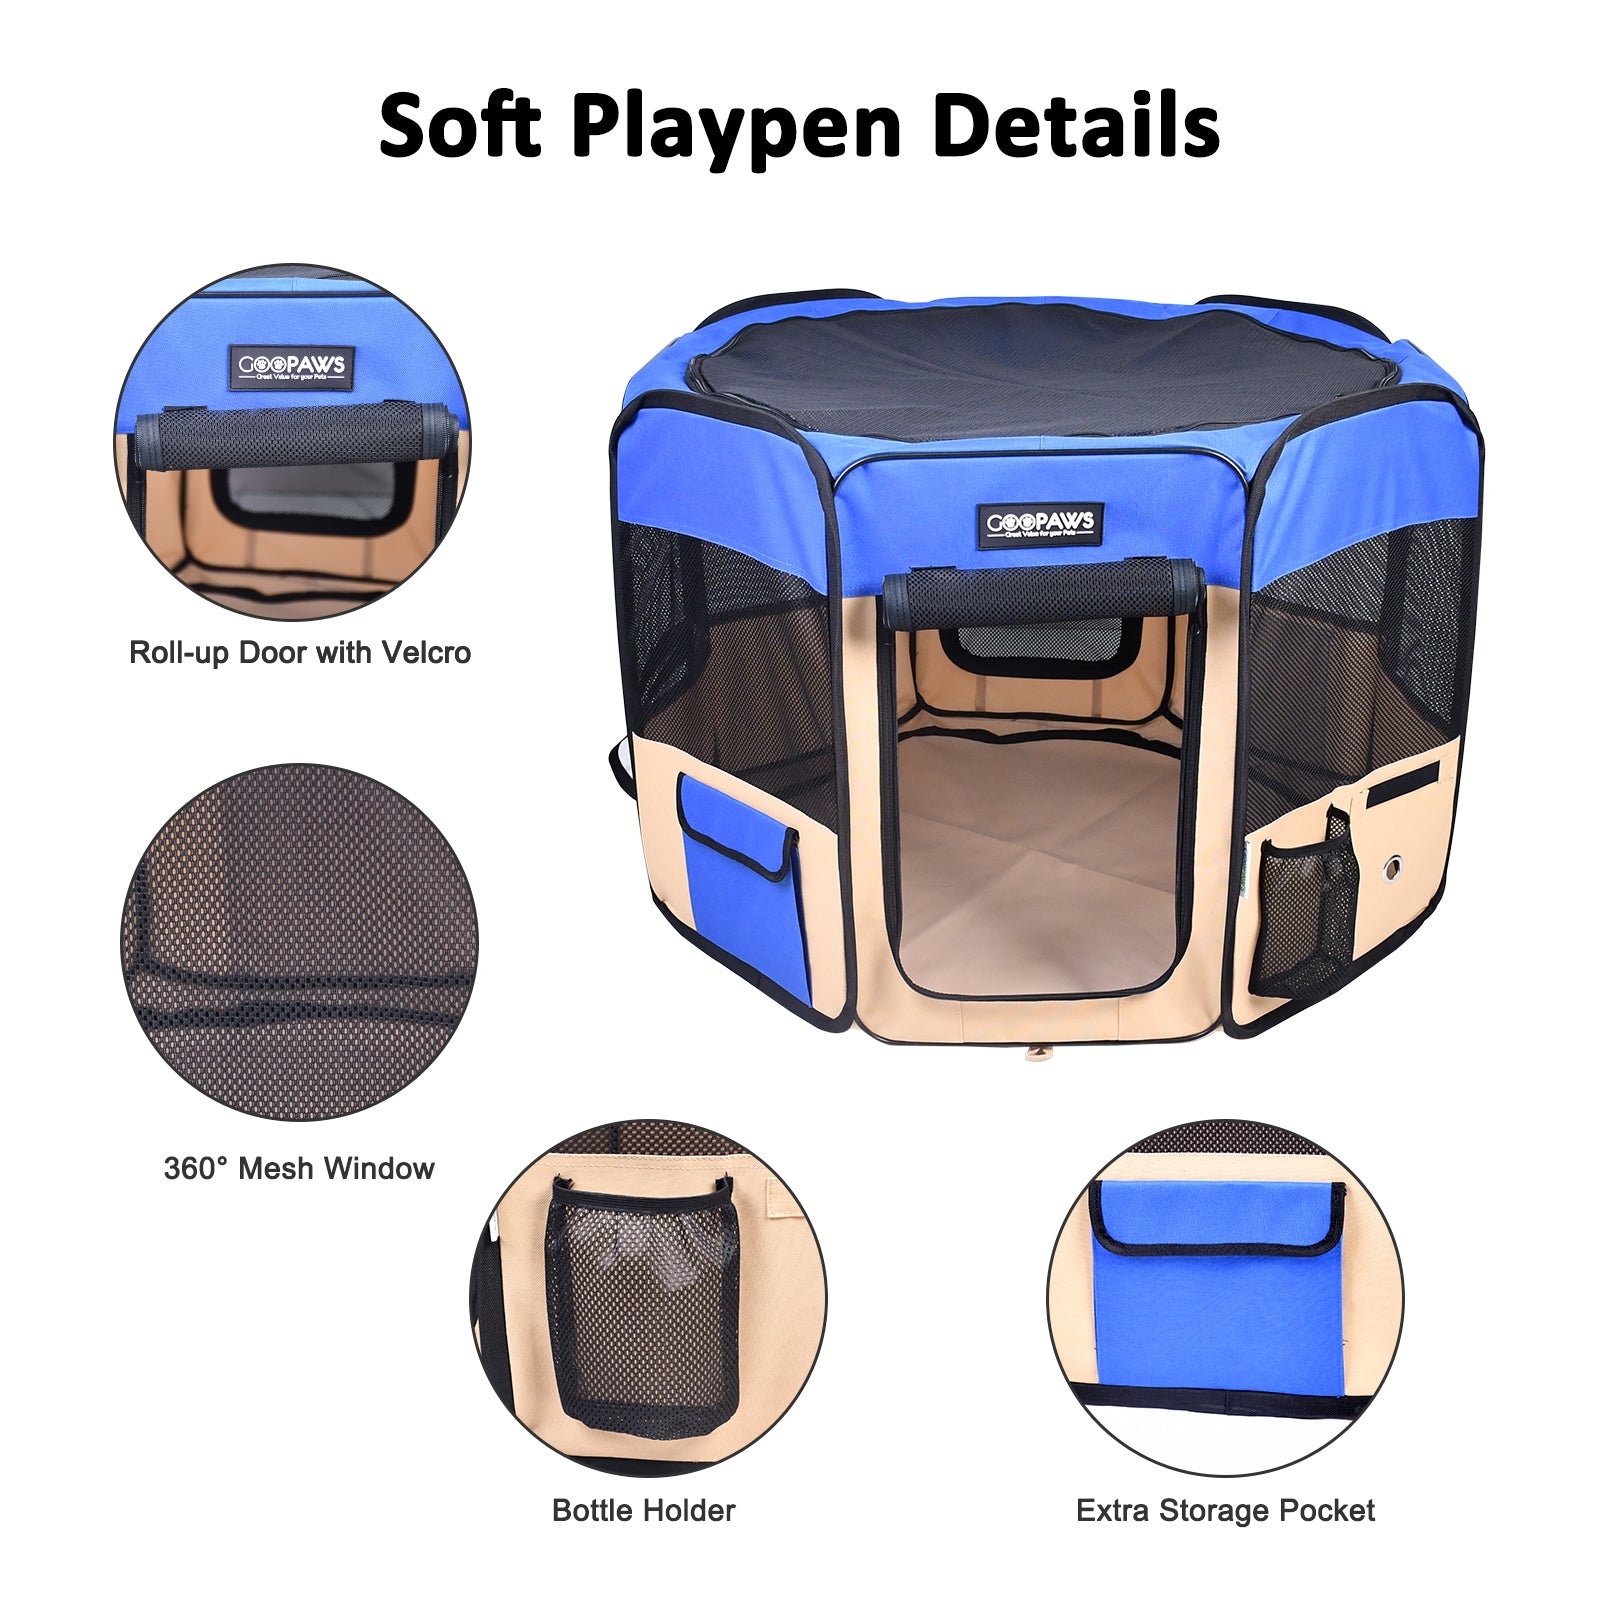 Jespet 2-Door Portable Soft-Sided Dog, Cat & Small Pet Exercise Playpen, Blue, 61''